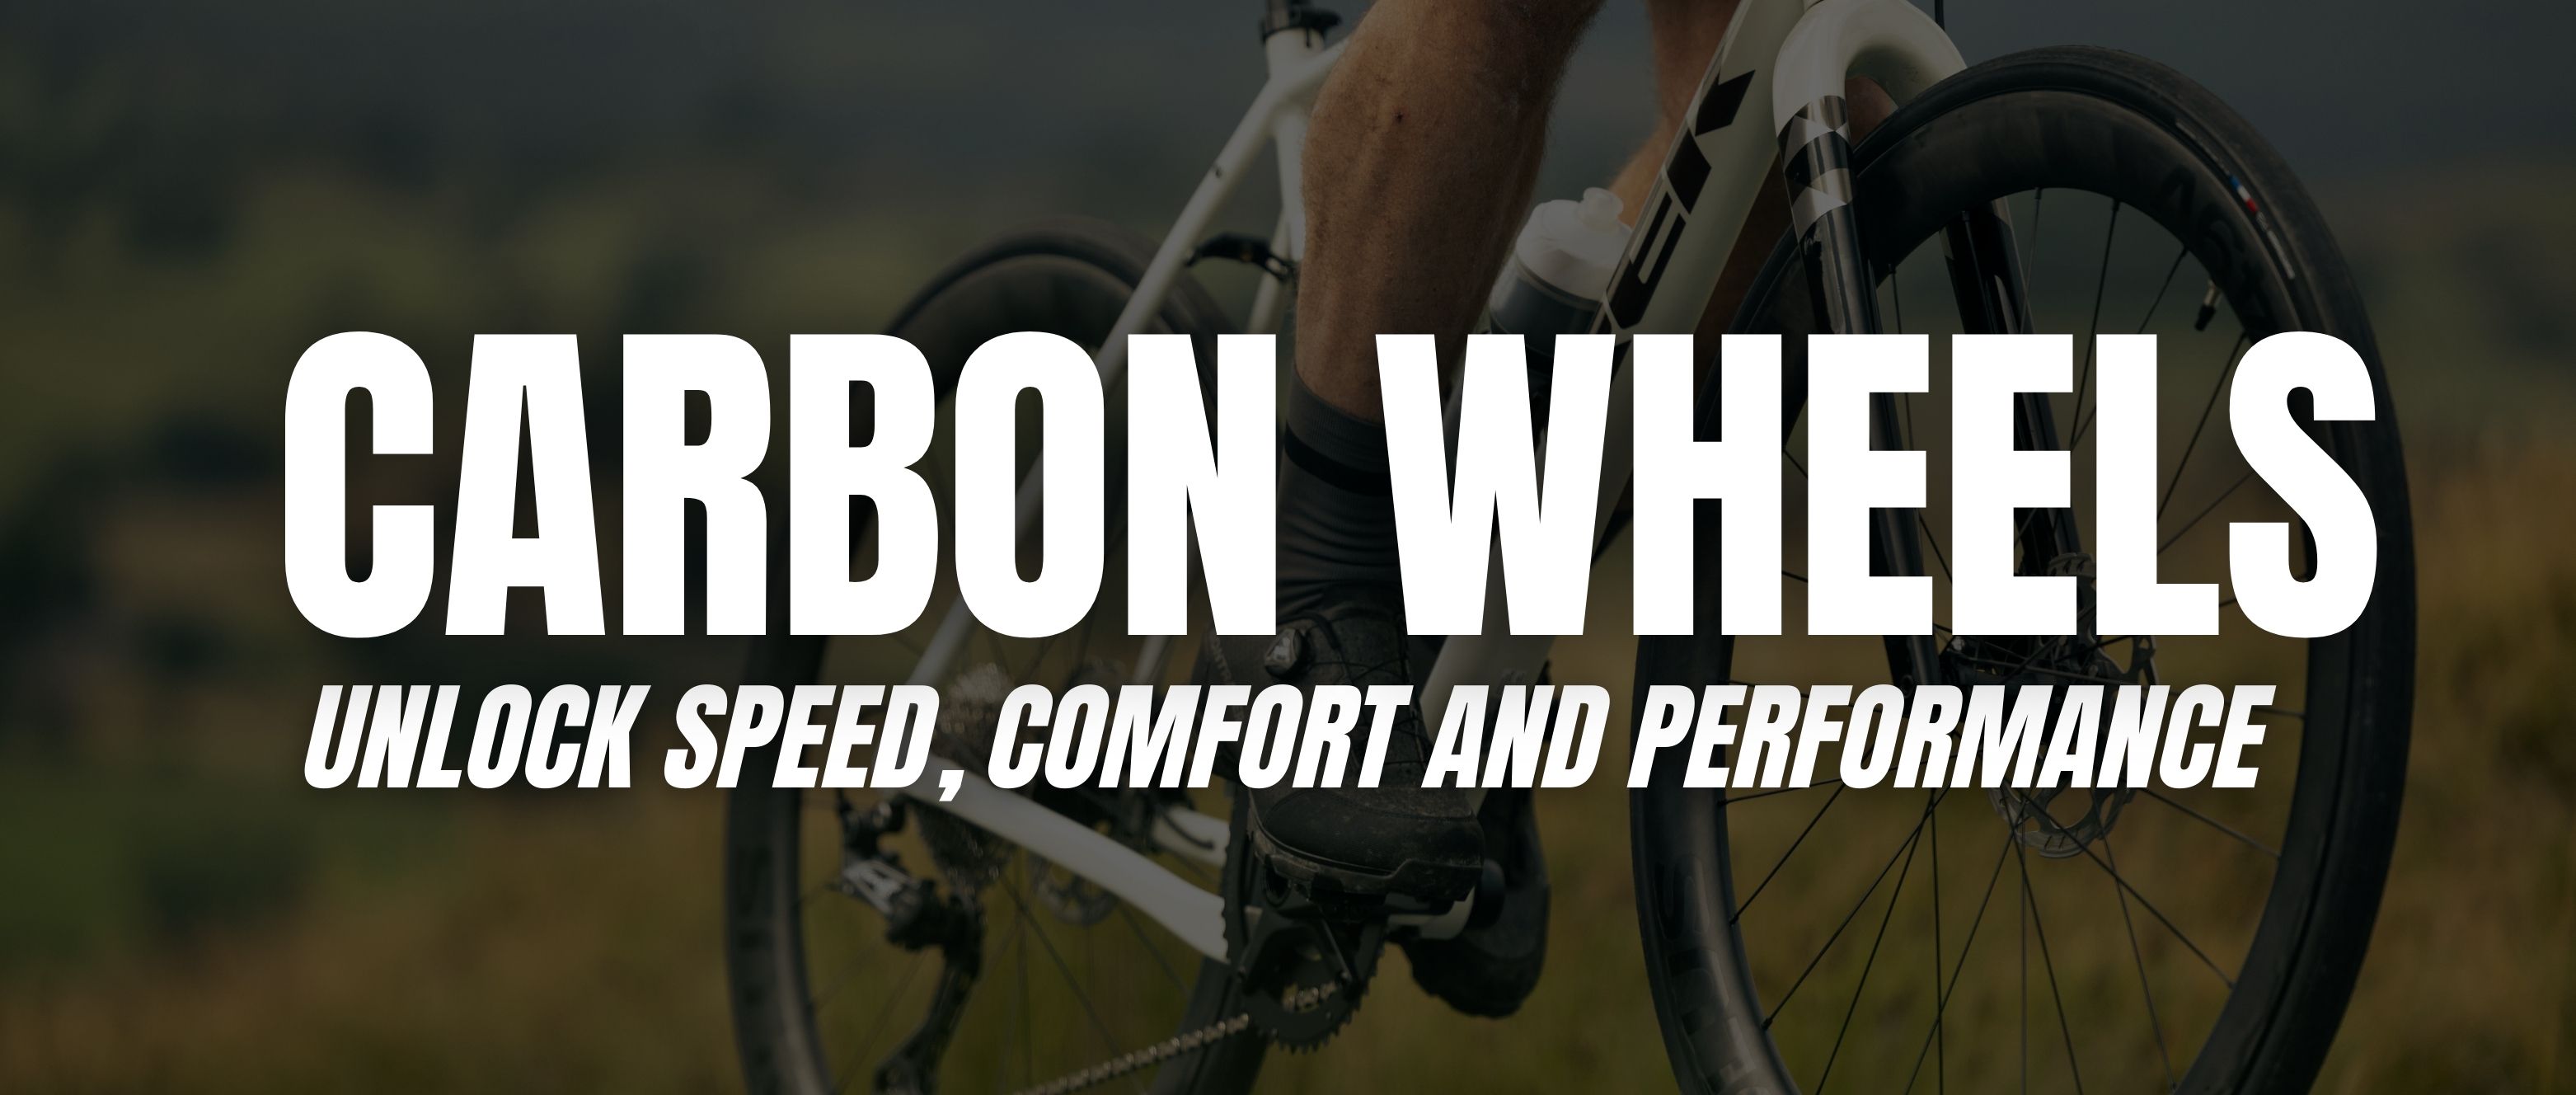 Carbon Wheels, Unlock speed, comfort and performance